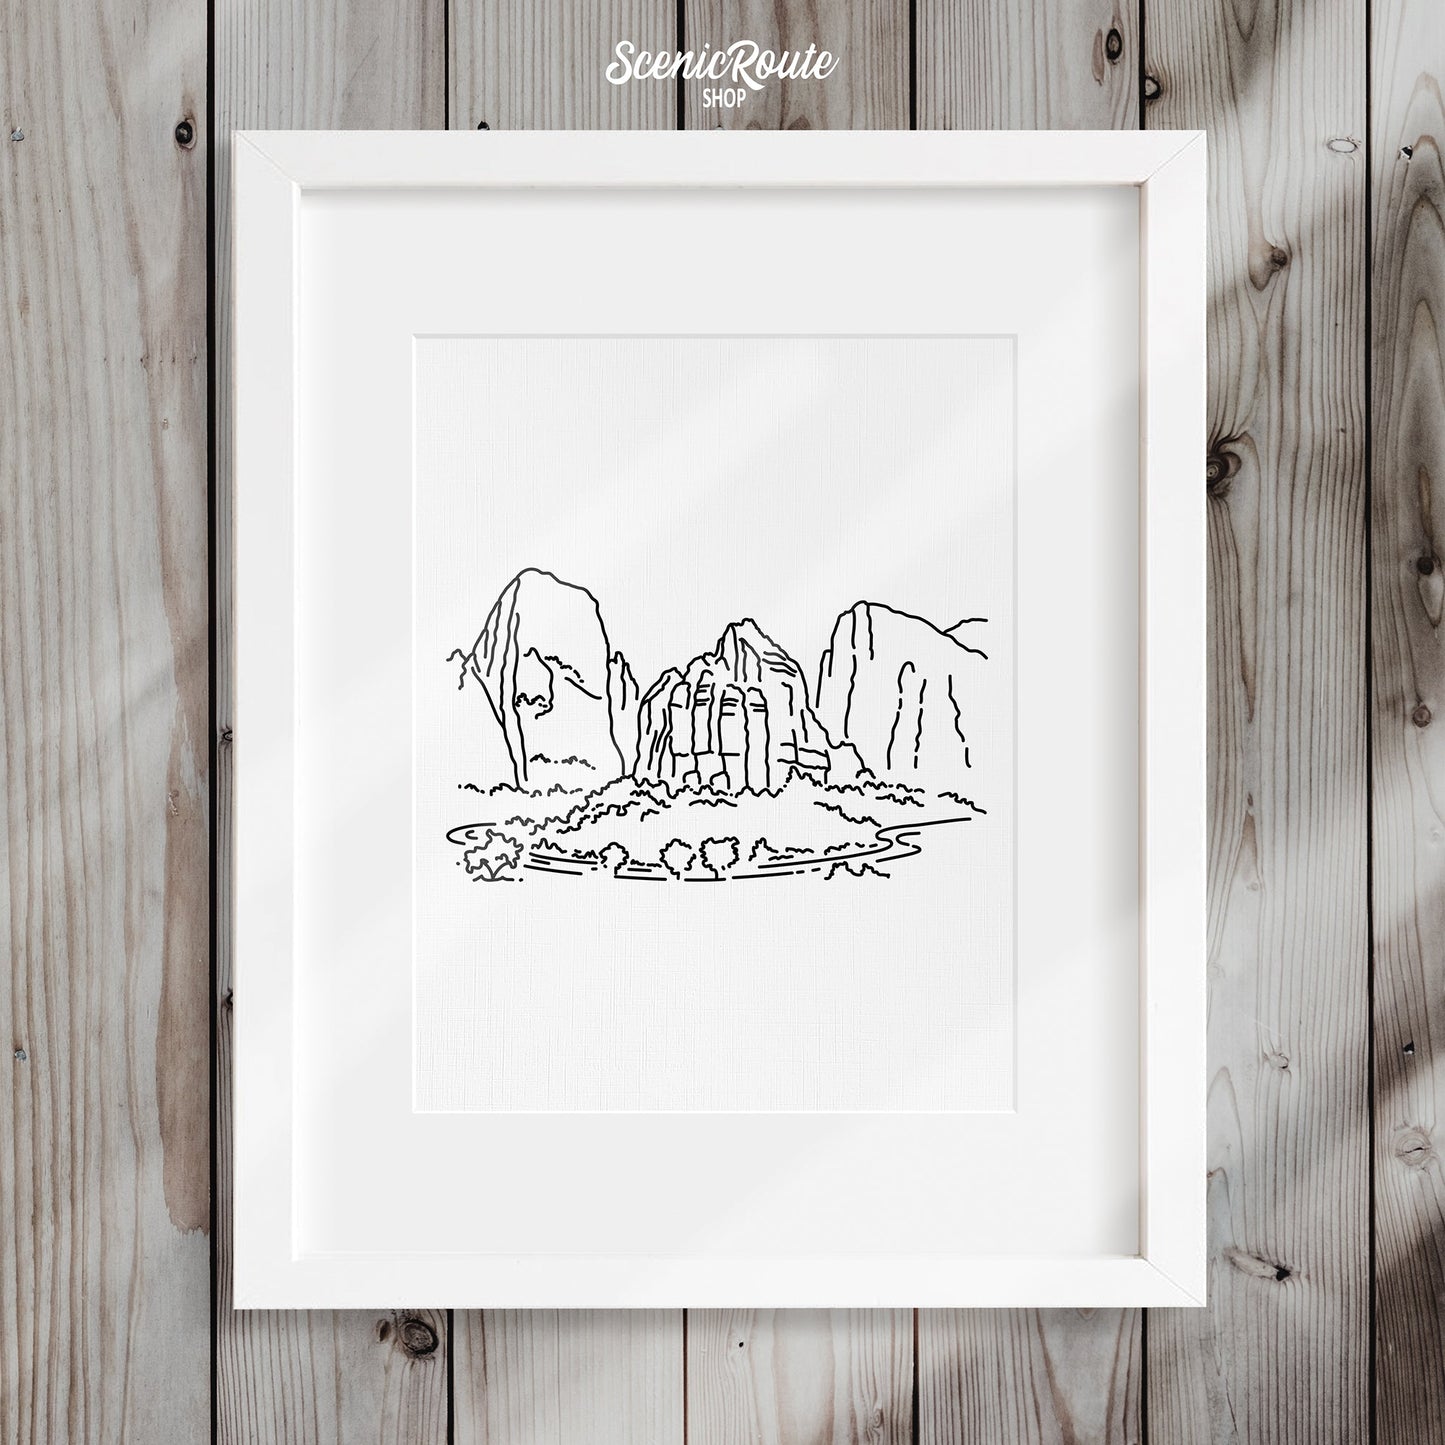 A framed line art drawing of Zion National Park on a wood wall